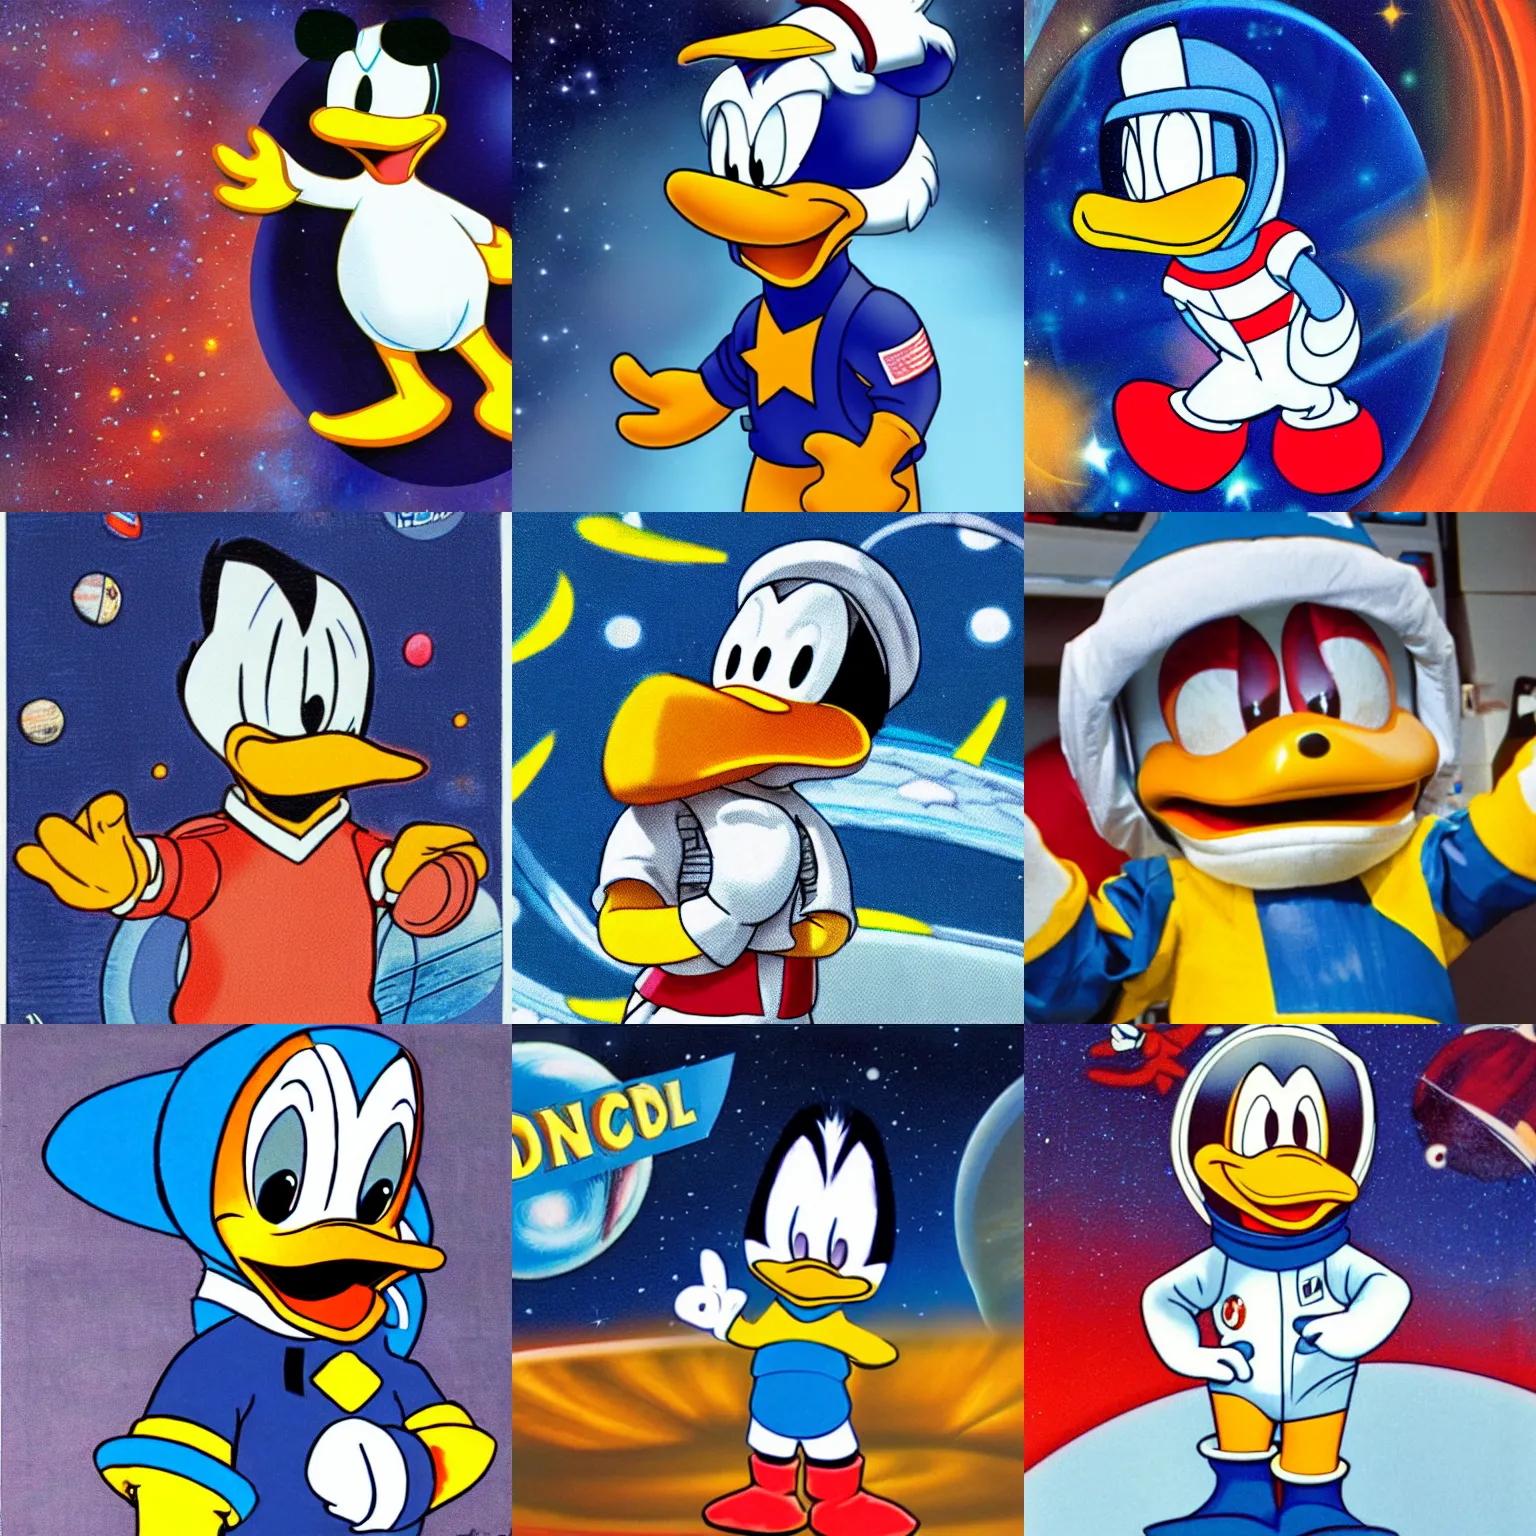 Prompt: Donald Duck wearing a space suit